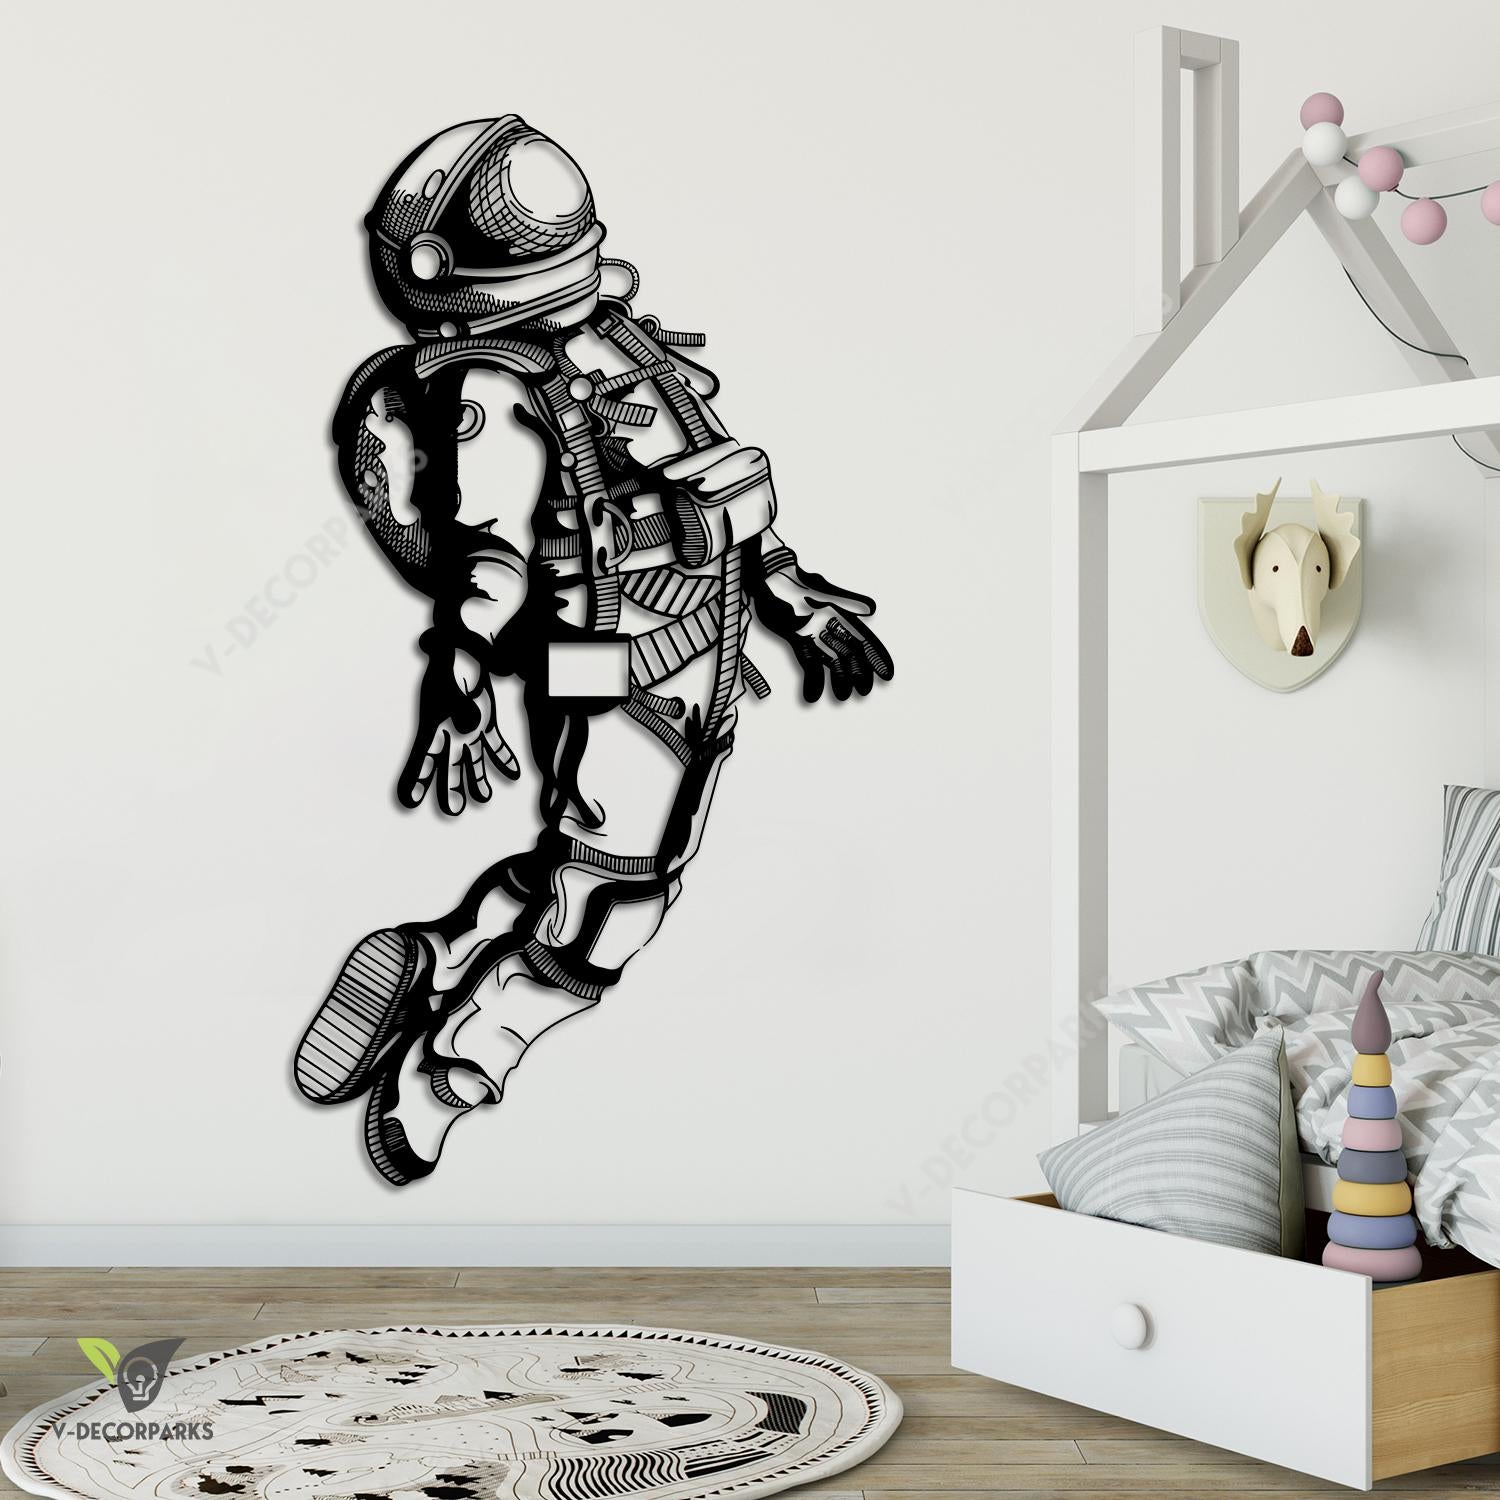 Astronaut, Space Man Metal Art, Astronaut, Space Man Decorative Wall Hanging For Sons Bedroom